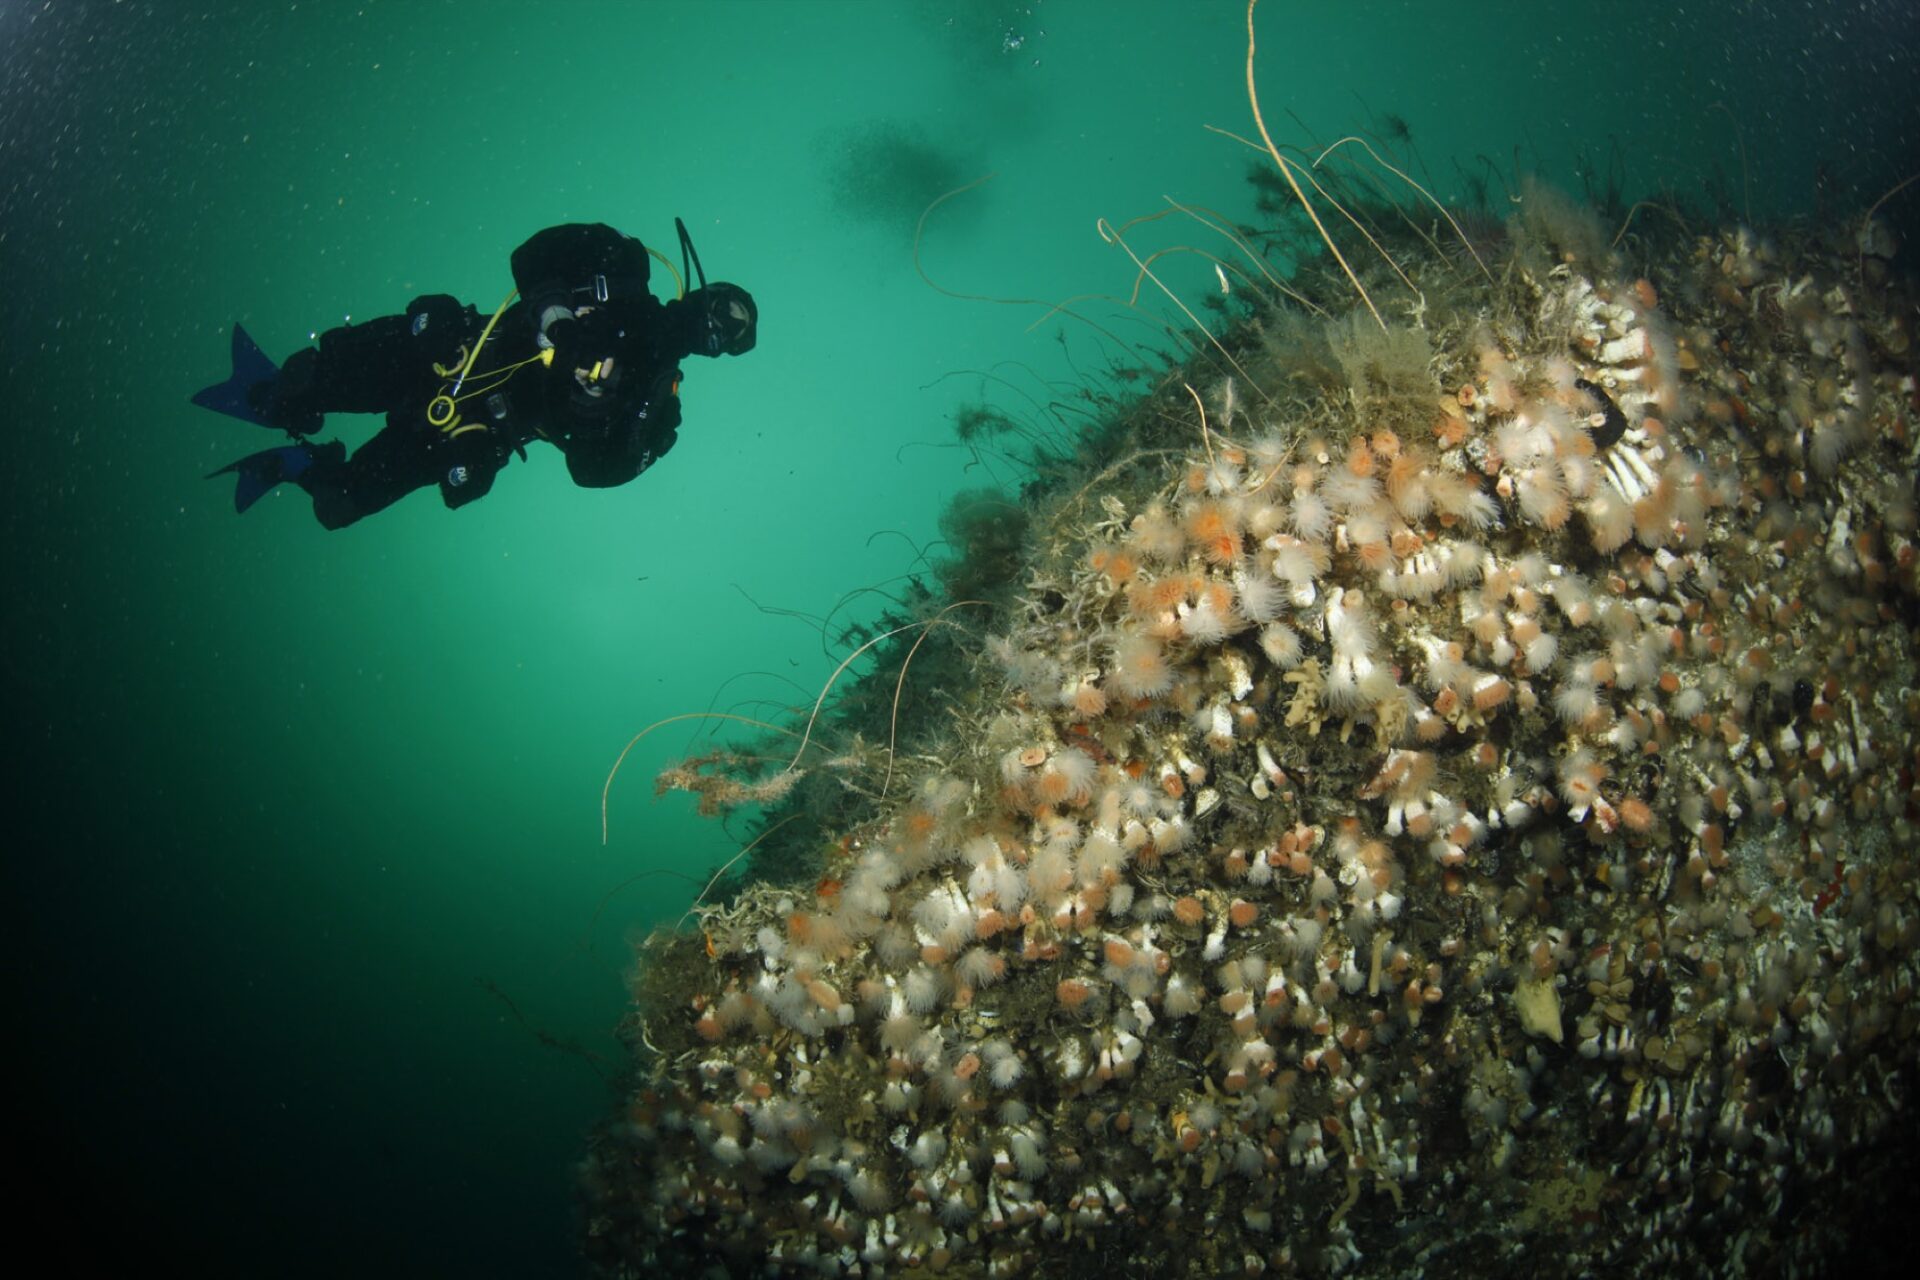 Diving in Comau Fjord, next to an intact coral bank of the fjord coral Desmophyllum dianthus in 2003. Many species of sponges, starfish and other invertebrates live in or around marine animal forests like these.